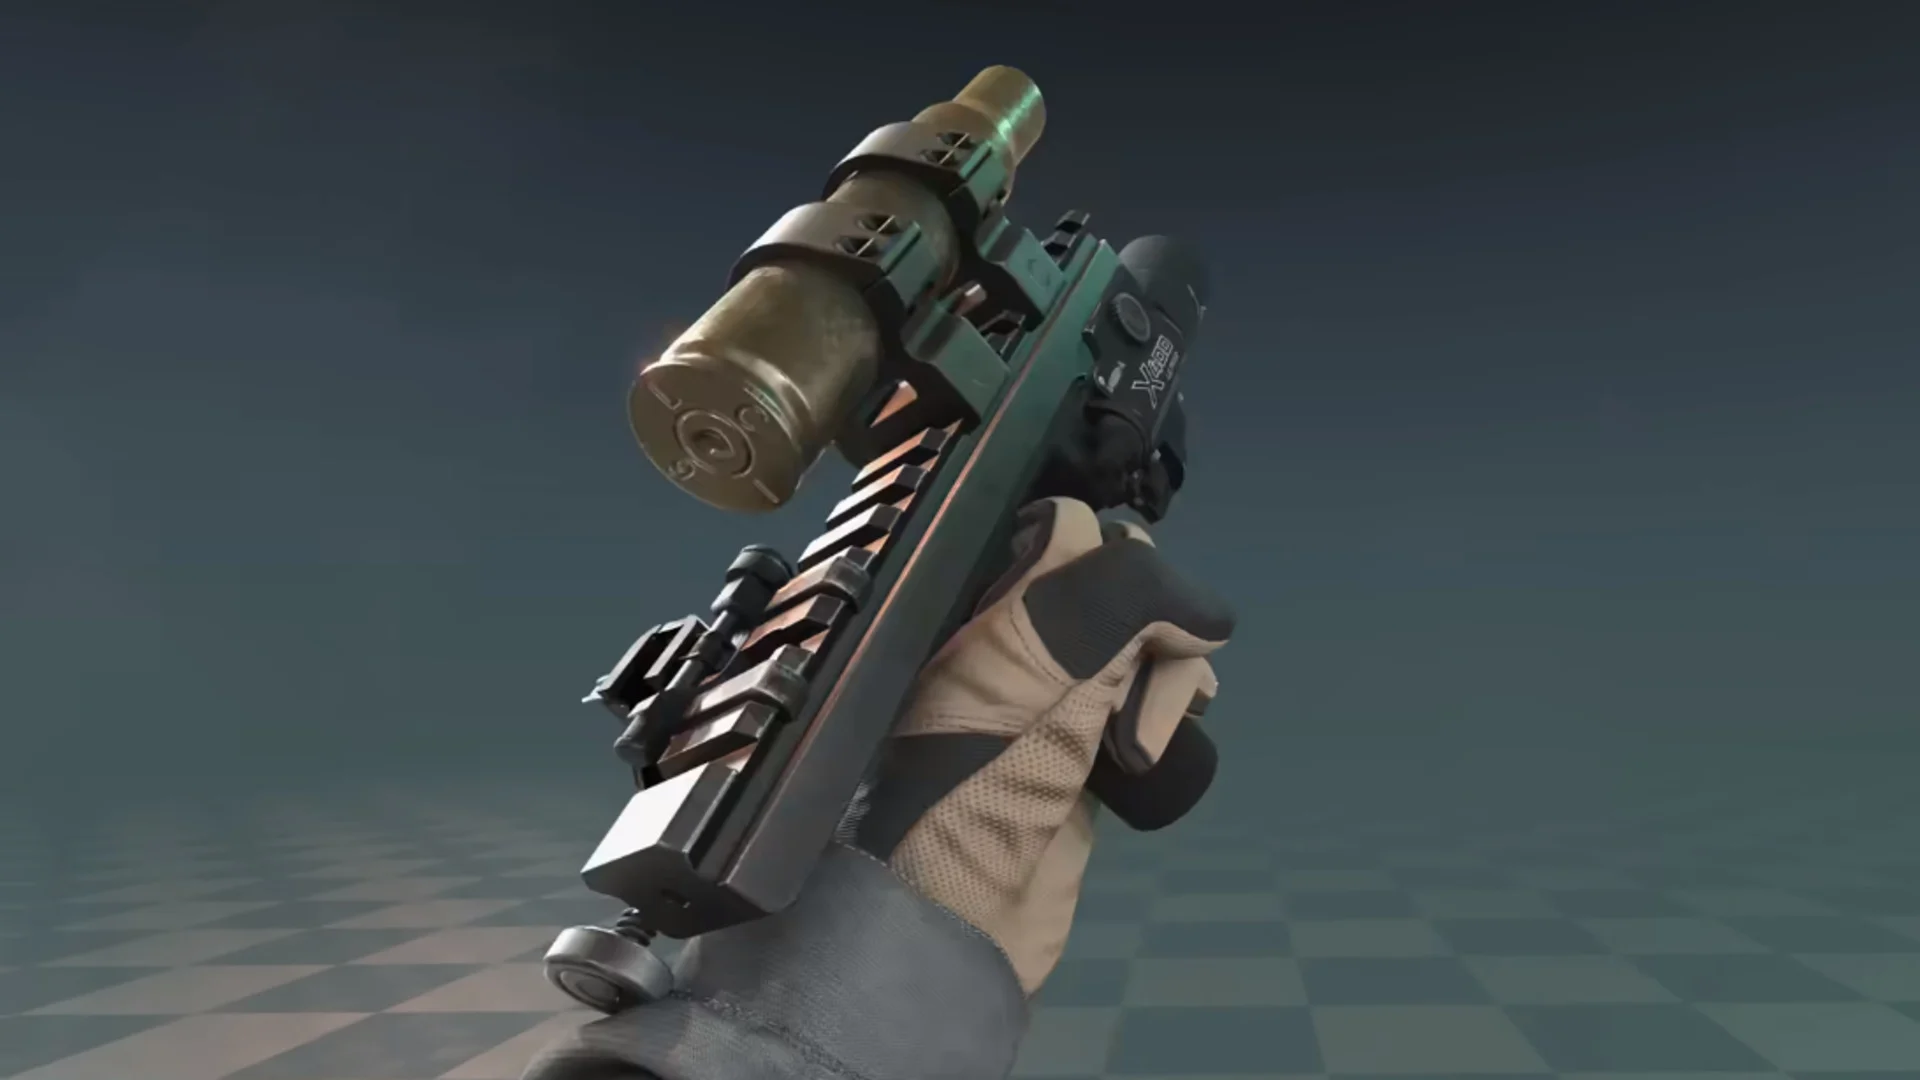 Infinity Ward Animator Introduces Whimsical Gun Concept 'The Whizzbanger' for Call of Duty